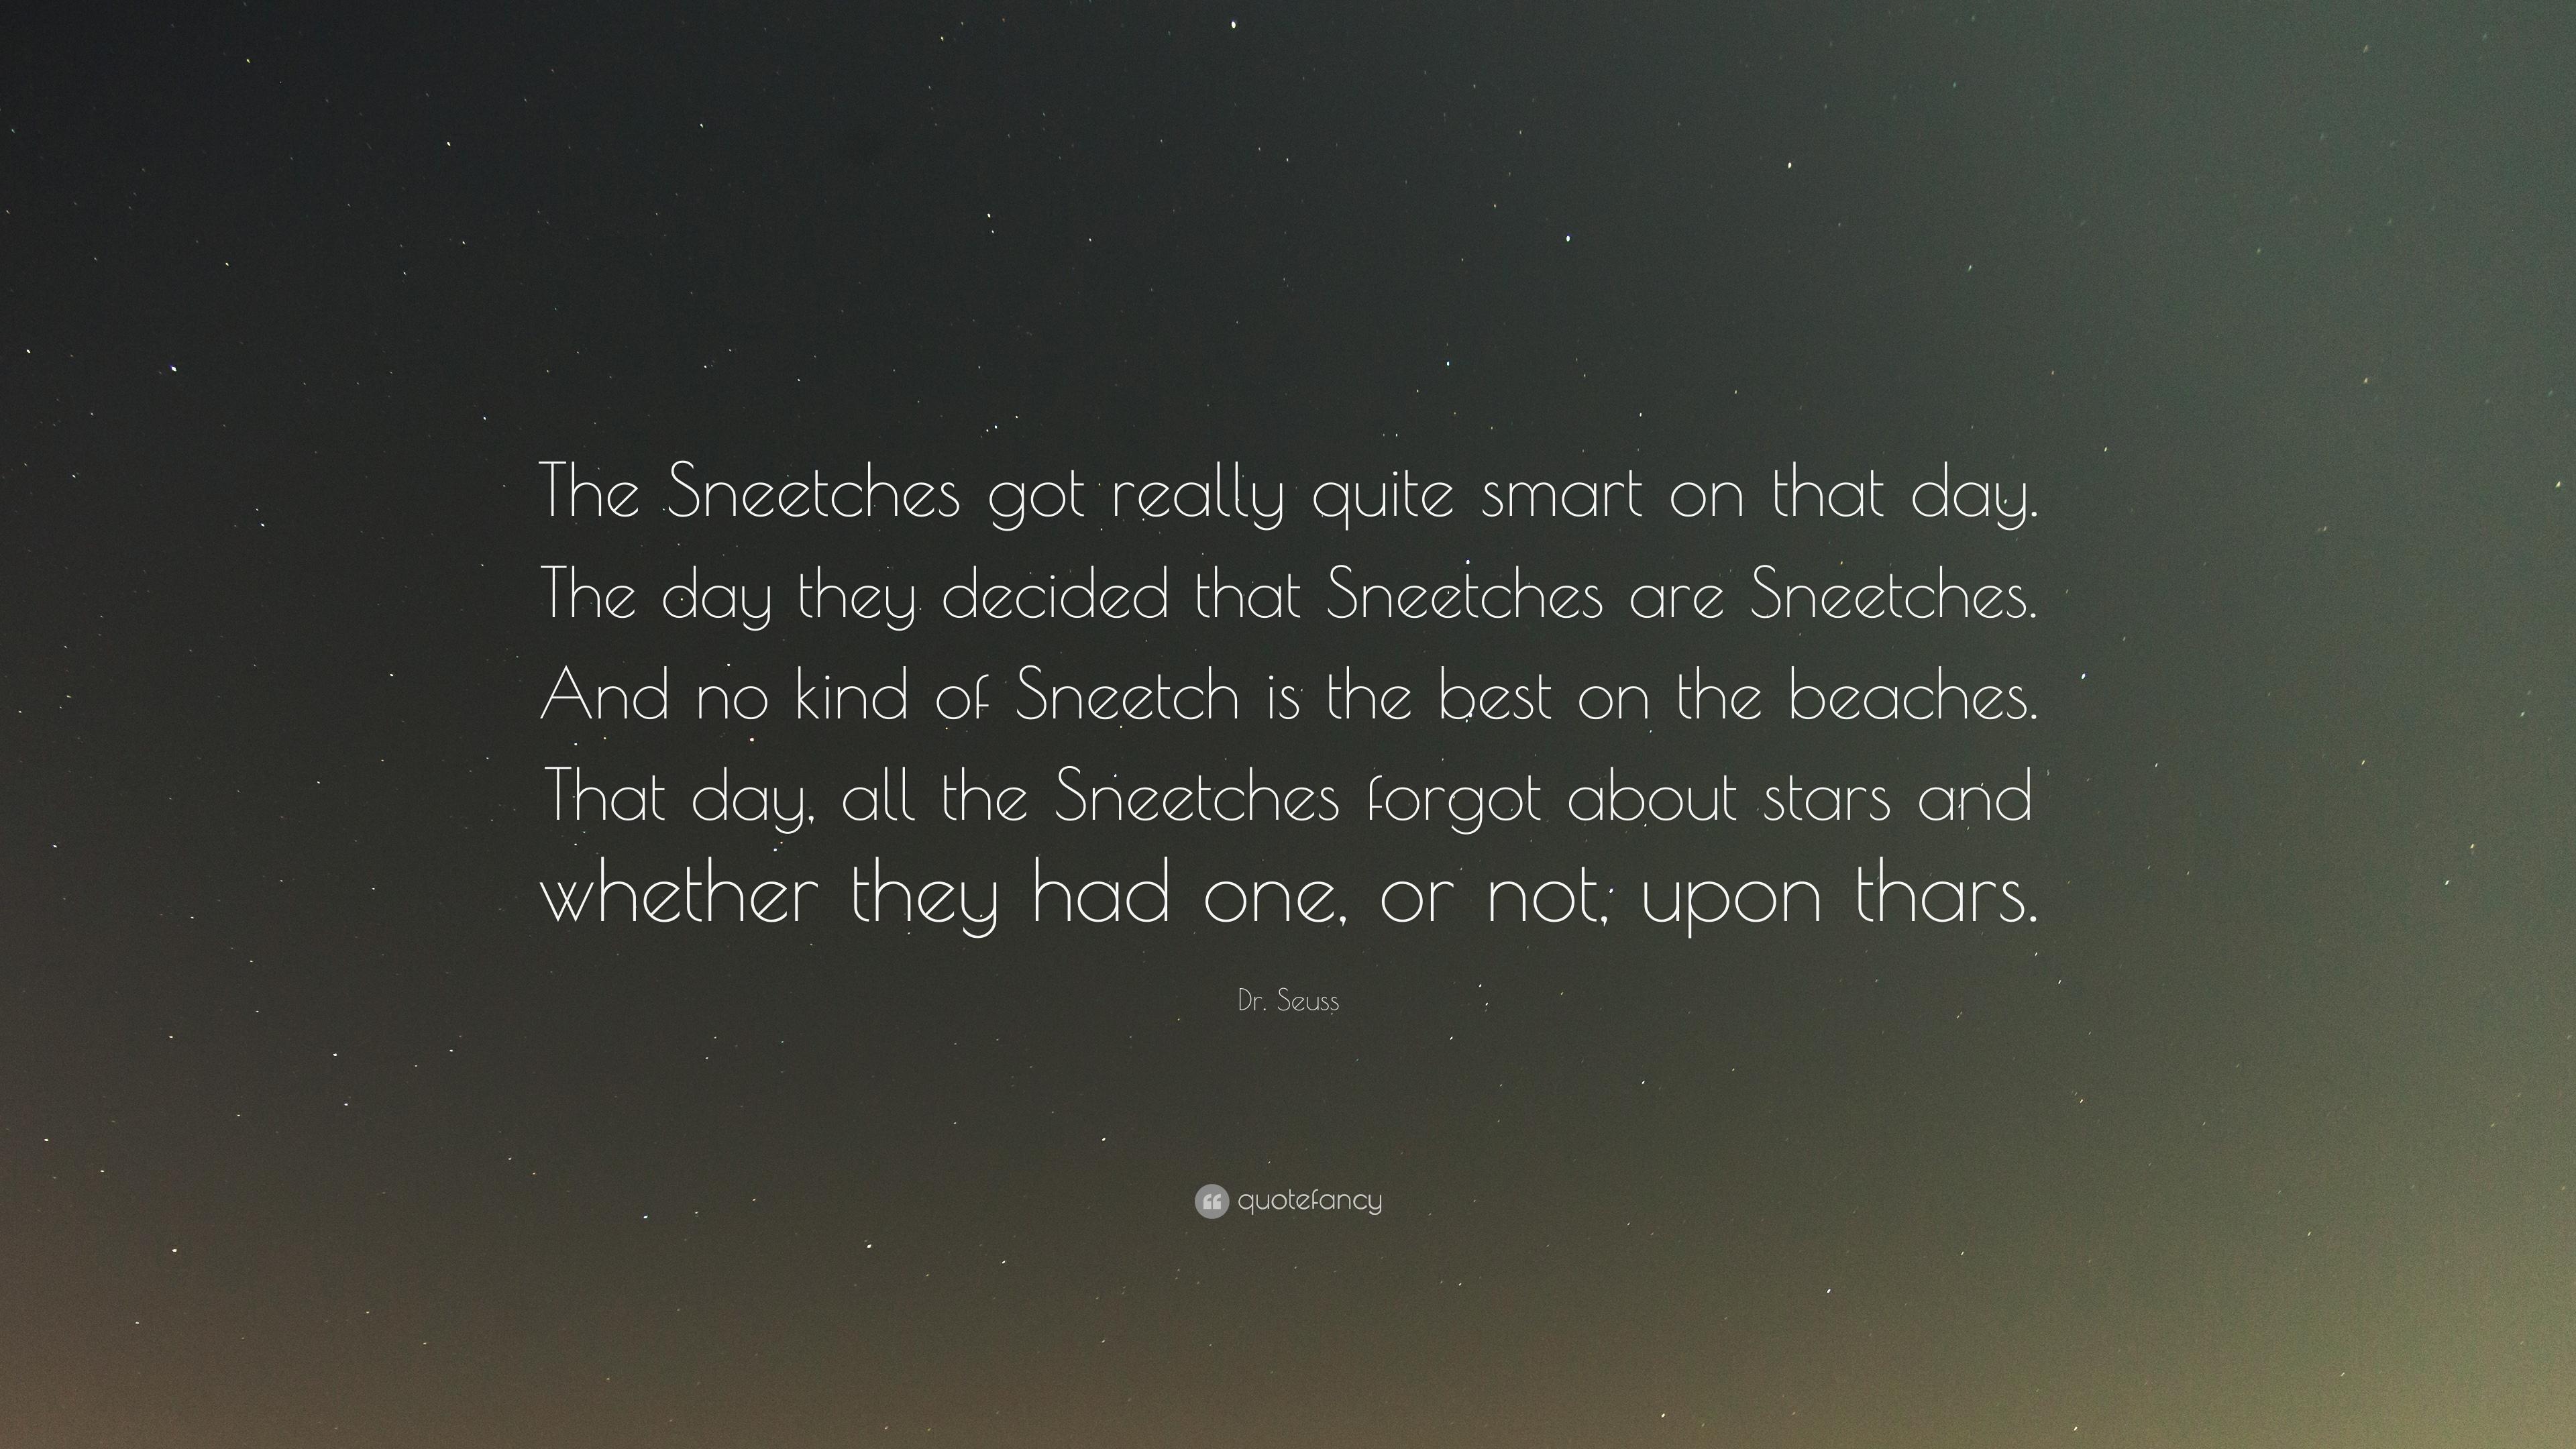 Dr. Seuss Quote: “The Sneetches got really quite smart on that day